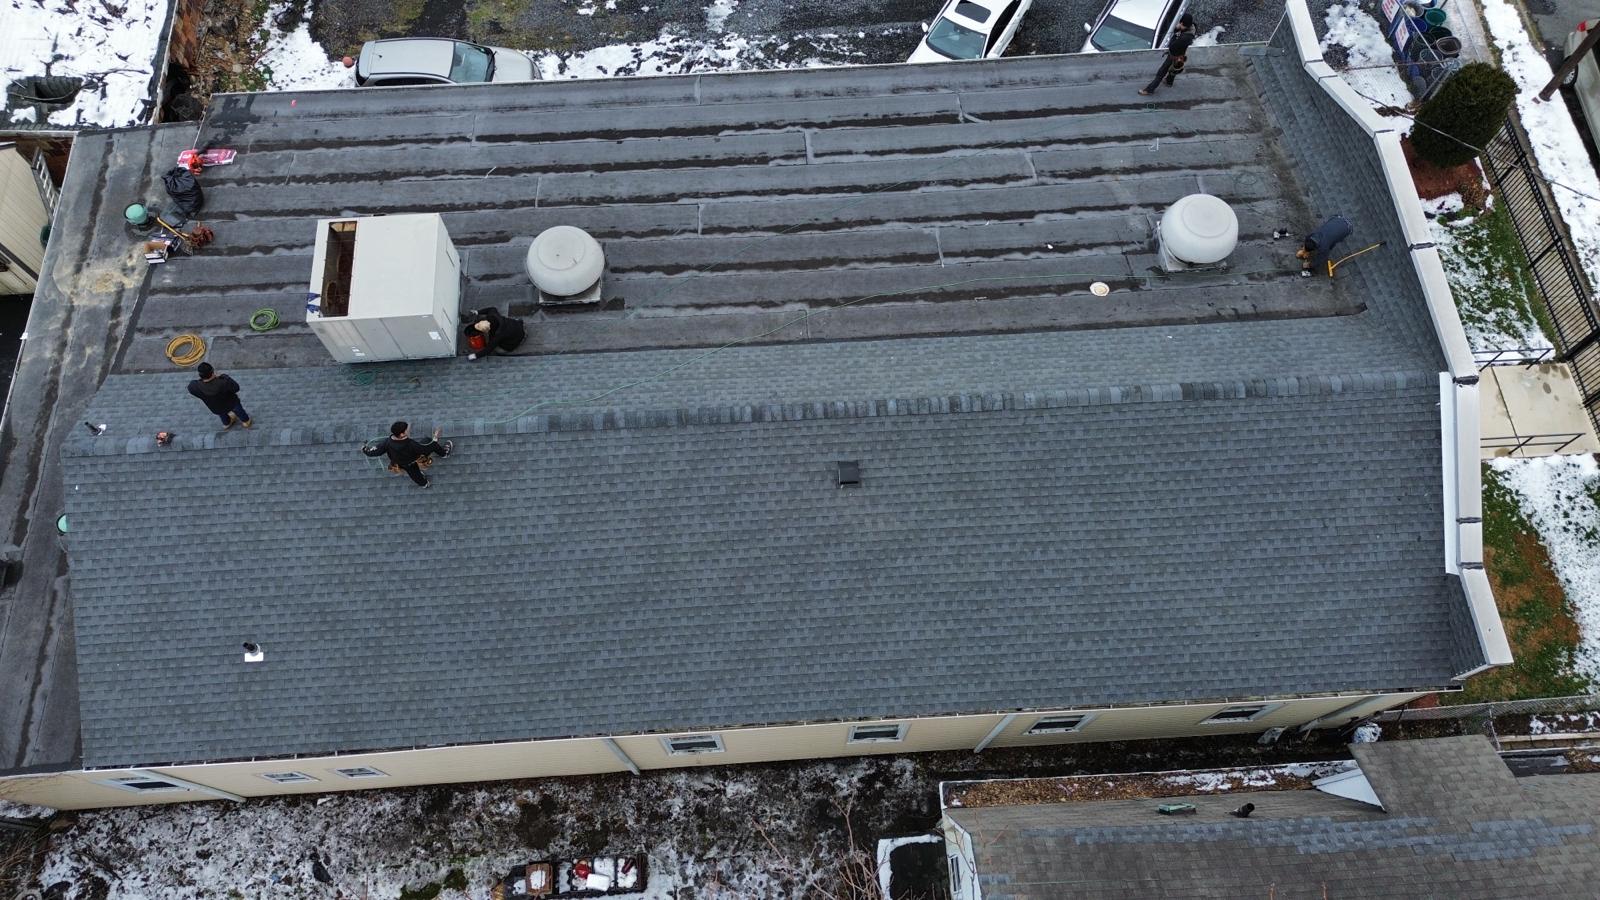 New Roof Installation in Perth Amboy NJ Project Shot 24